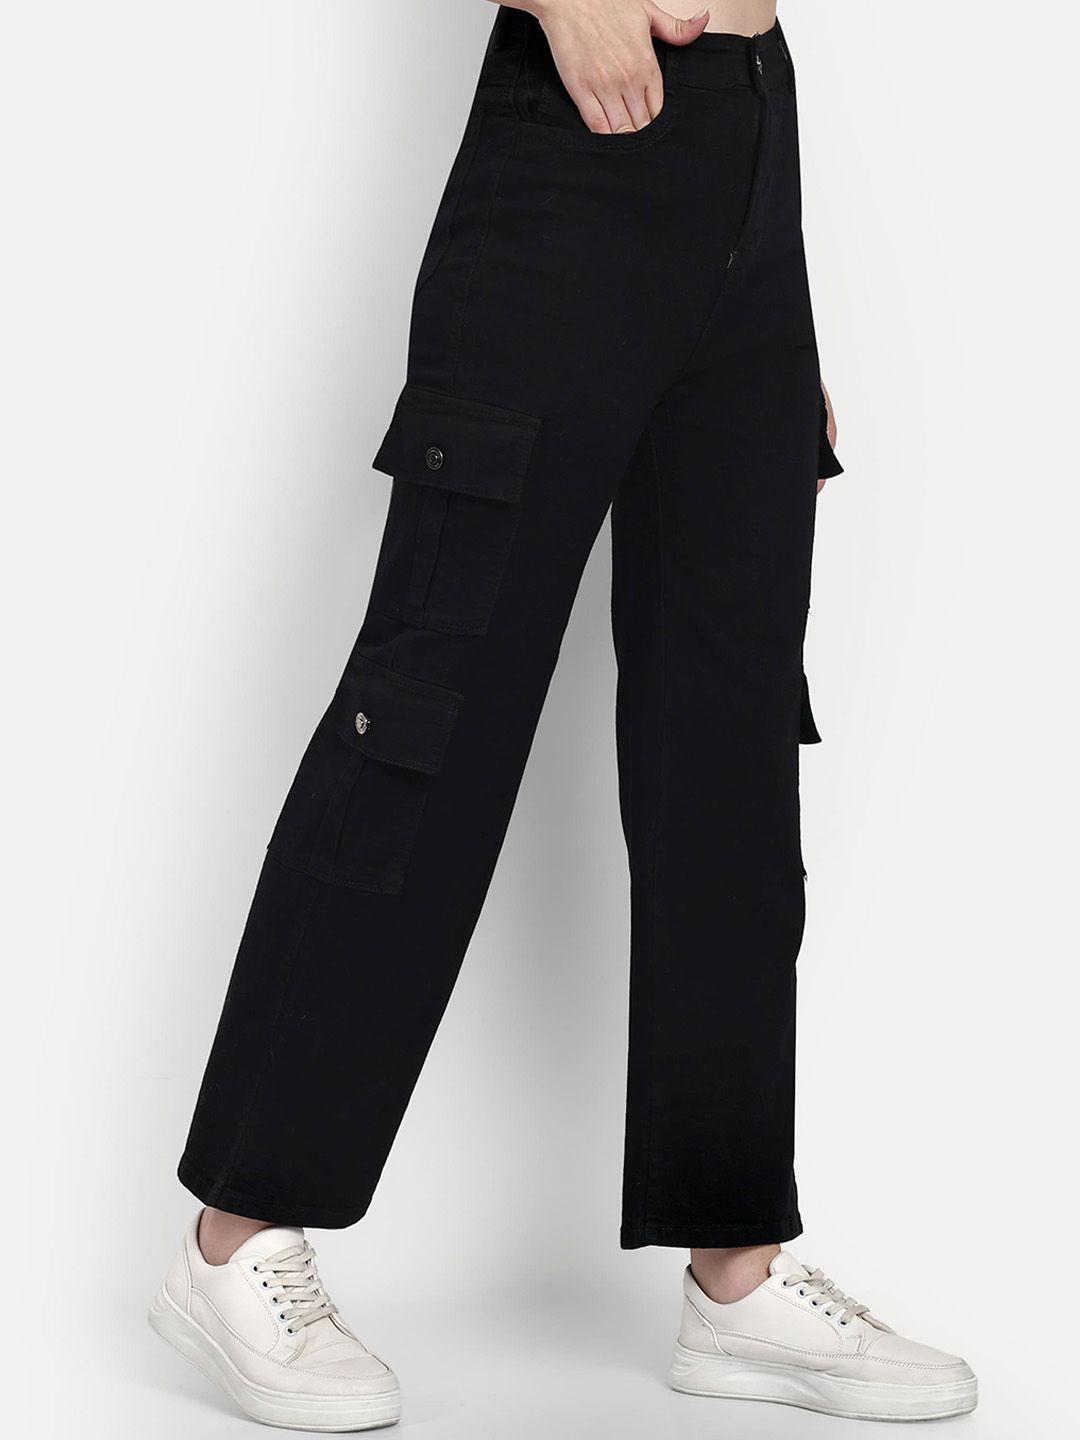 next-one-women-black-smart-wide-leg-high-rise-mildly-distressed-stretchable-jeans